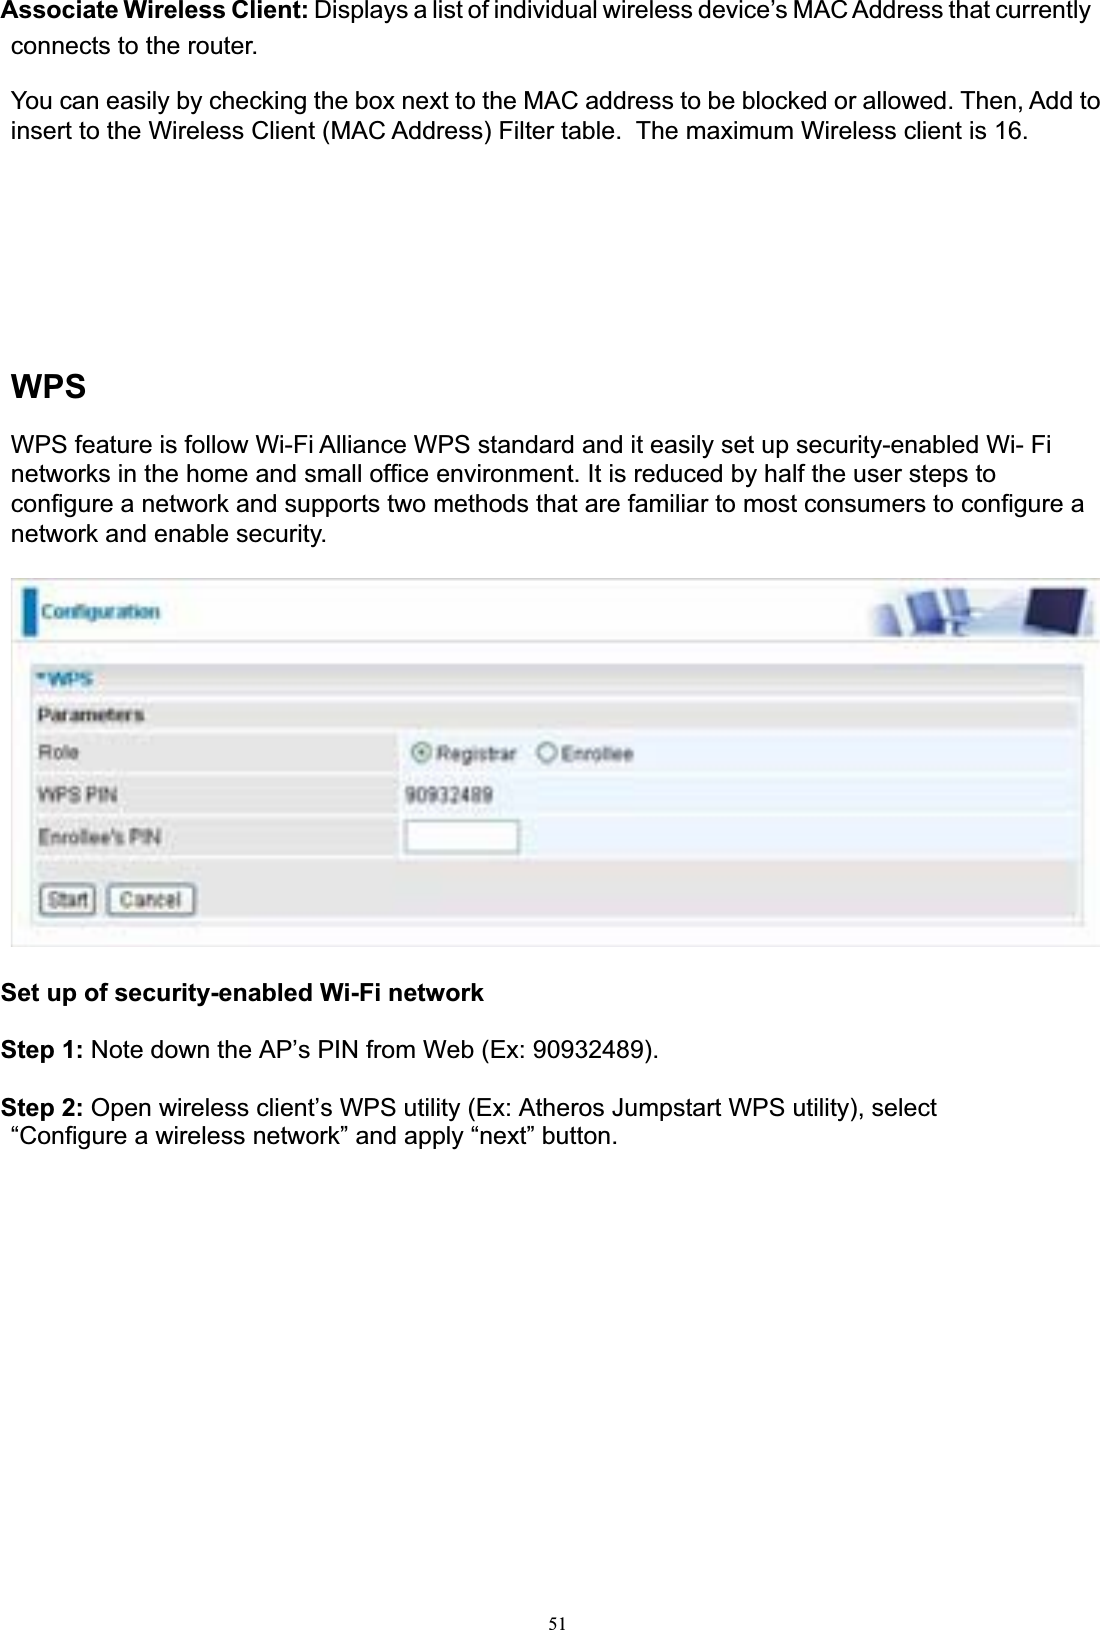 51Associate Wireless Client: Displays a list of individual wireless device’s MAC Address that currently connects to the router. You can easily by checking the box next to the MAC address to be blocked or allowed. Then, Add to insert to the Wireless Client (MAC Address) Filter table.  The maximum Wireless client is 16. WPSWPS feature is follow Wi-Fi Alliance WPS standard and it easily set up security-enabled Wi- Fi networks in the home and small office environment. It is reduced by half the user steps to configure a network and supports two methods that are familiar to most consumers to configure a network and enable security. Set up of security-enabled Wi-Fi network Step 1: Note down the AP’s PIN from Web (Ex: 90932489). Step 2: Open wireless client’s WPS utility (Ex: Atheros Jumpstart WPS utility), select “Configure a wireless network” and apply “next” button.